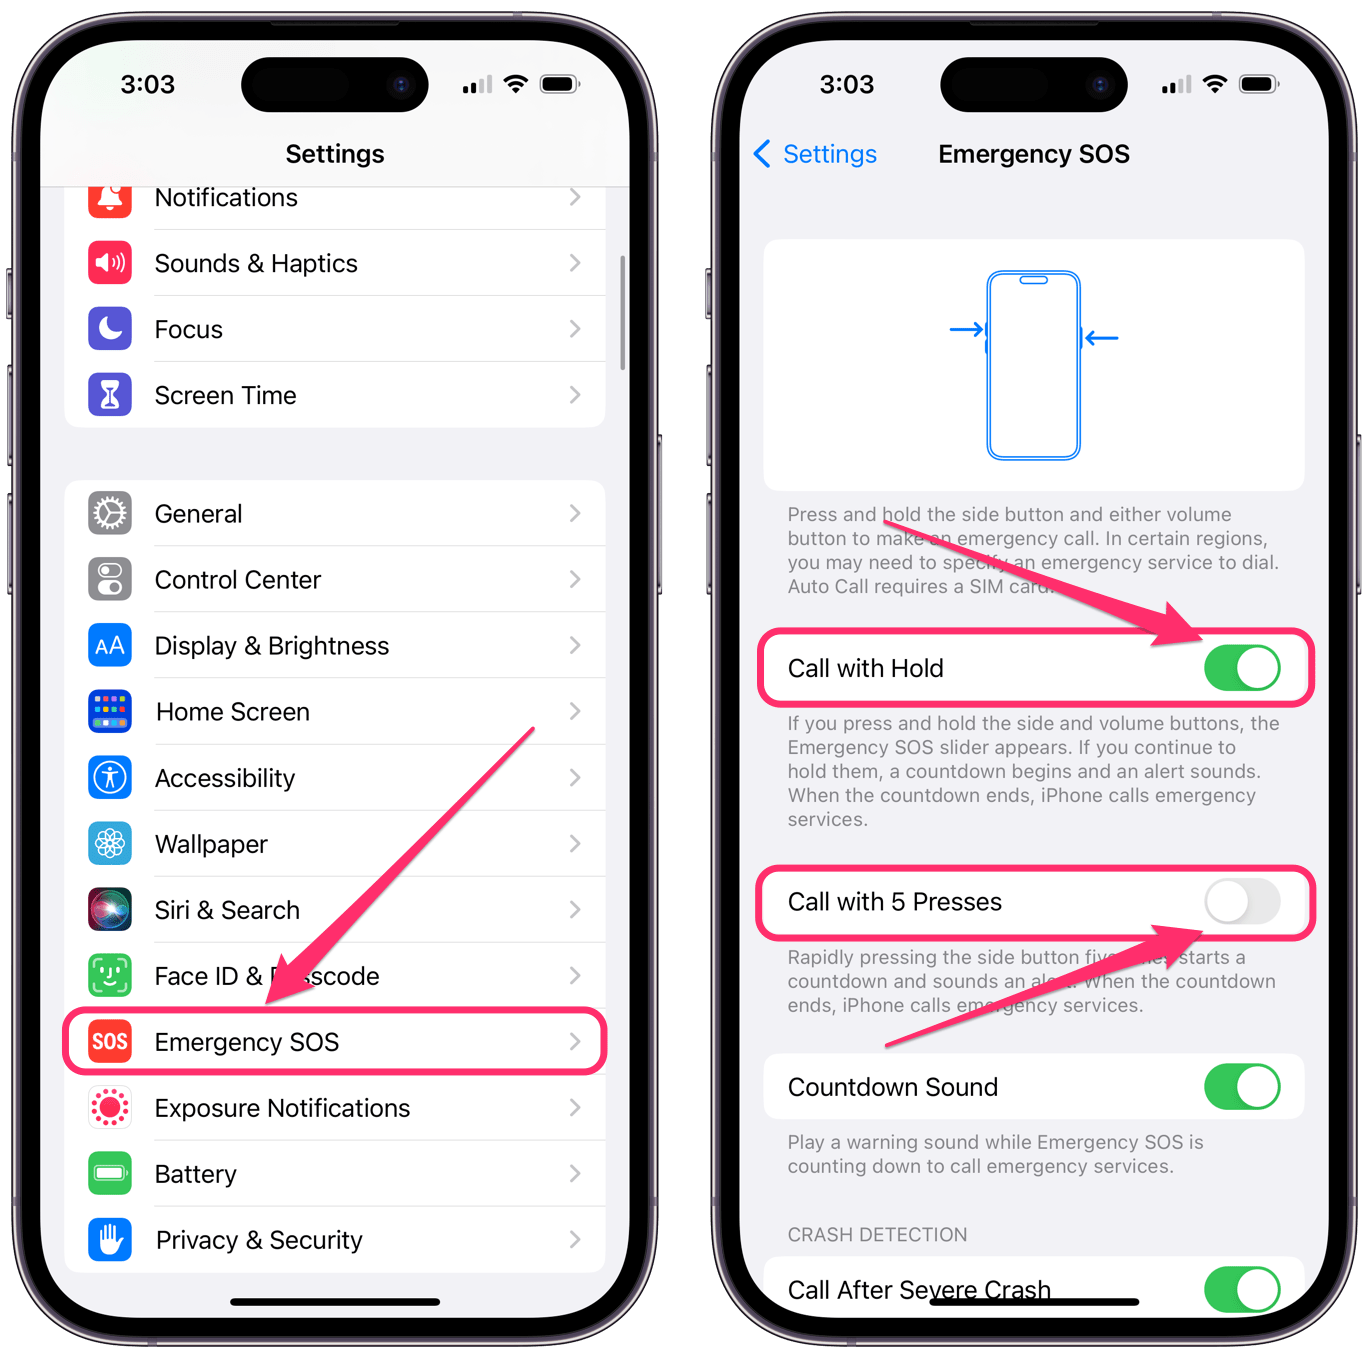 How to Turn Off Emergency SOS on an iPhone